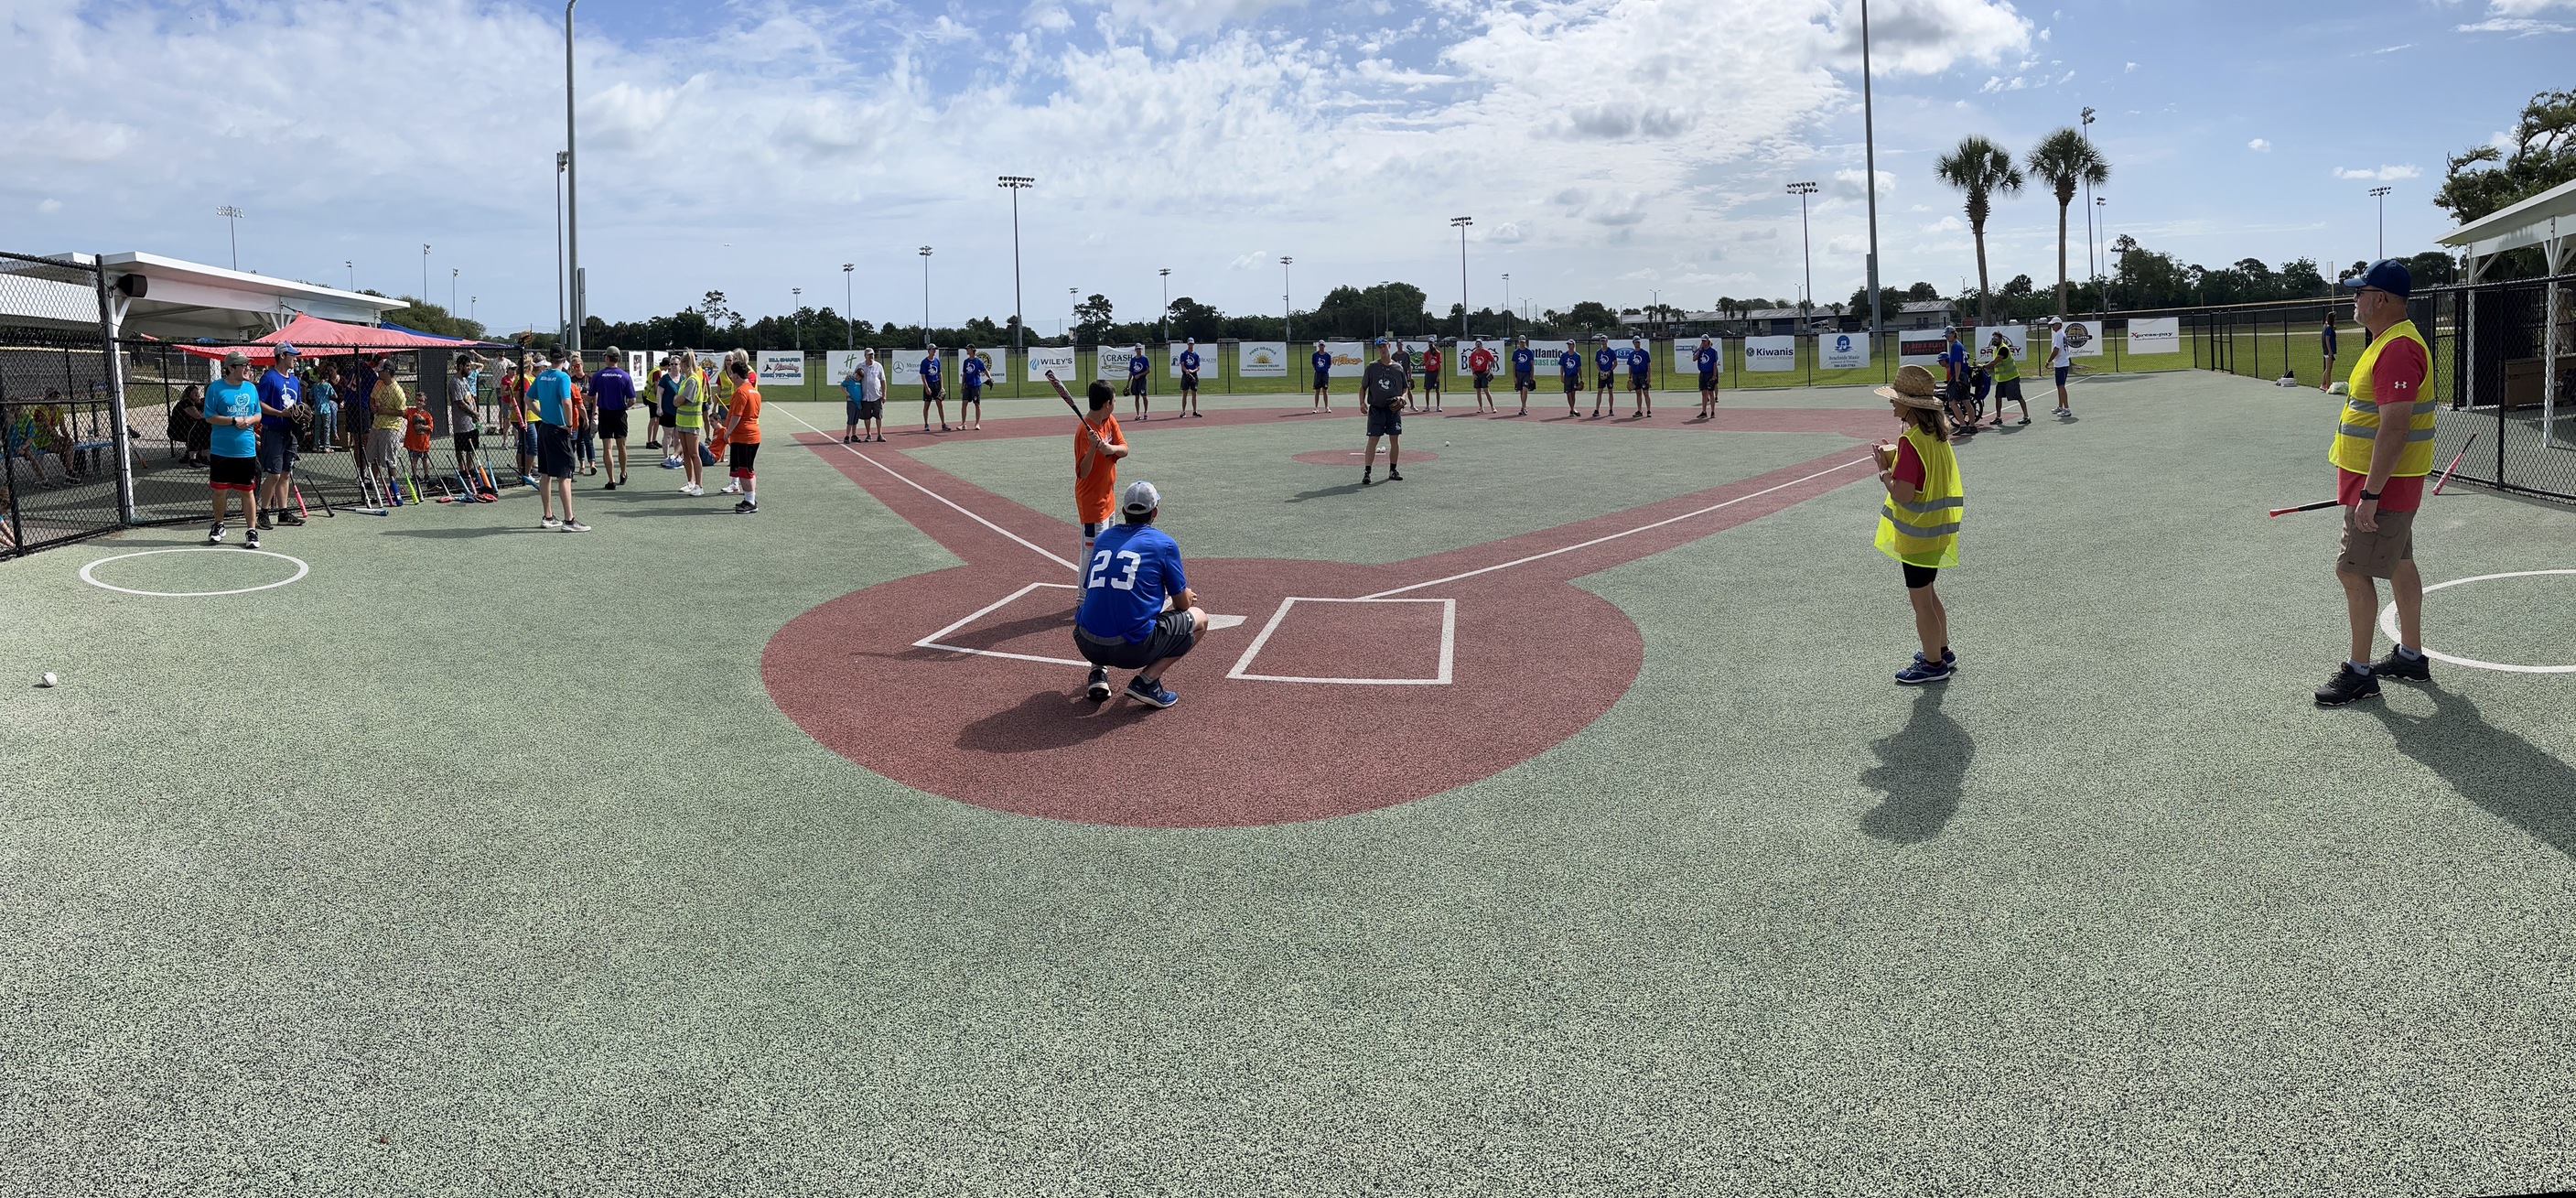 Falcon Baseball Joins with Miracle League of Volusia County for Saturday of Baseball